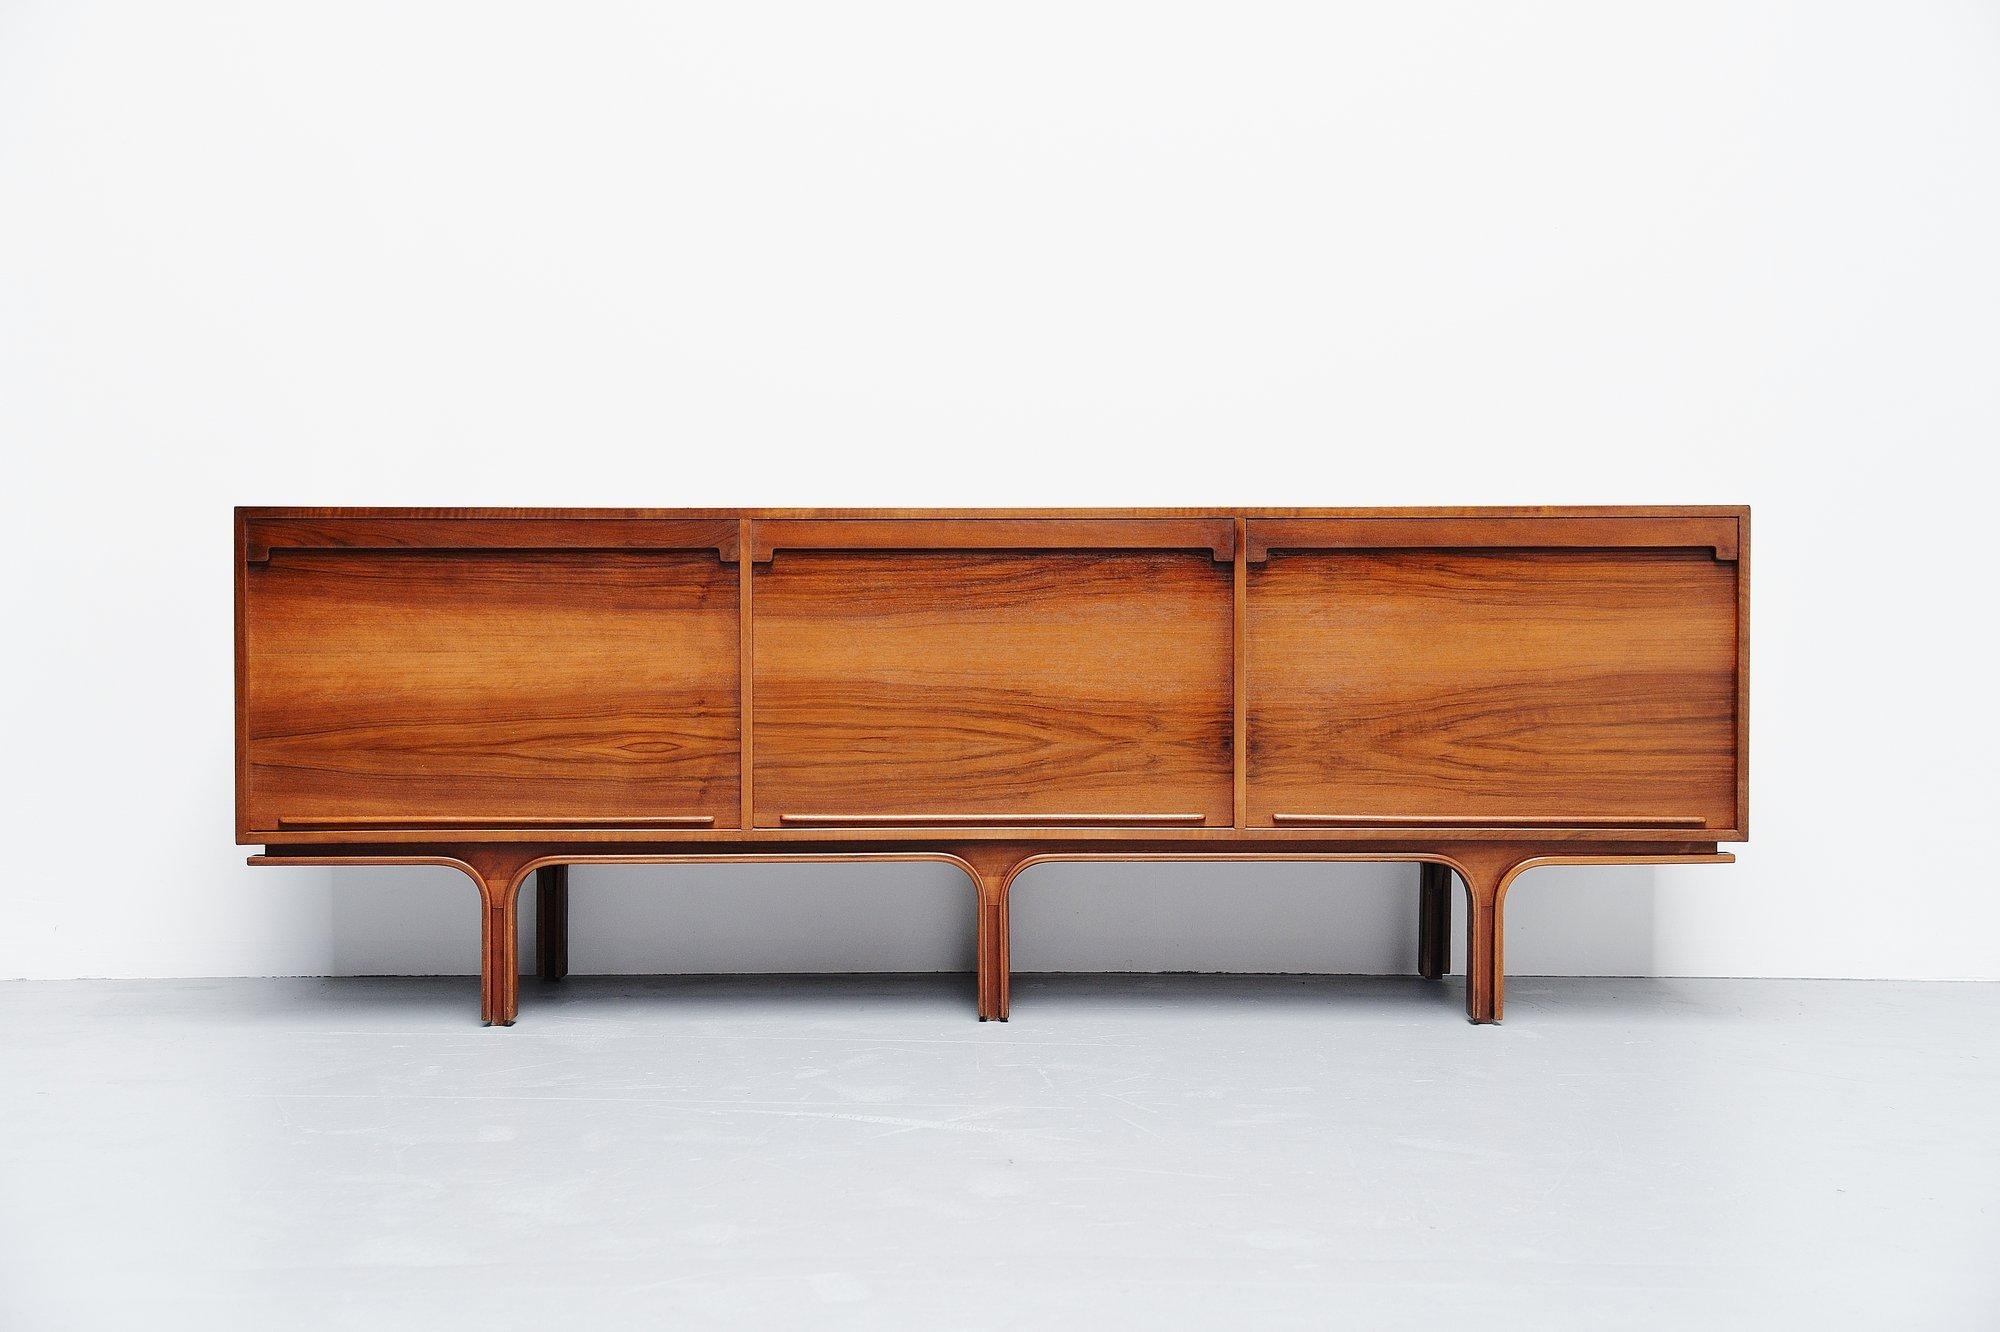 Very nice tambour sideboard designed by Gianfranco Frattini and manufactured by Bernini, Italy 1957. This nice shaped sideboard is made of walnut wood and has an amazing warm grain to the veneer. The sideboard is in very good original condition with